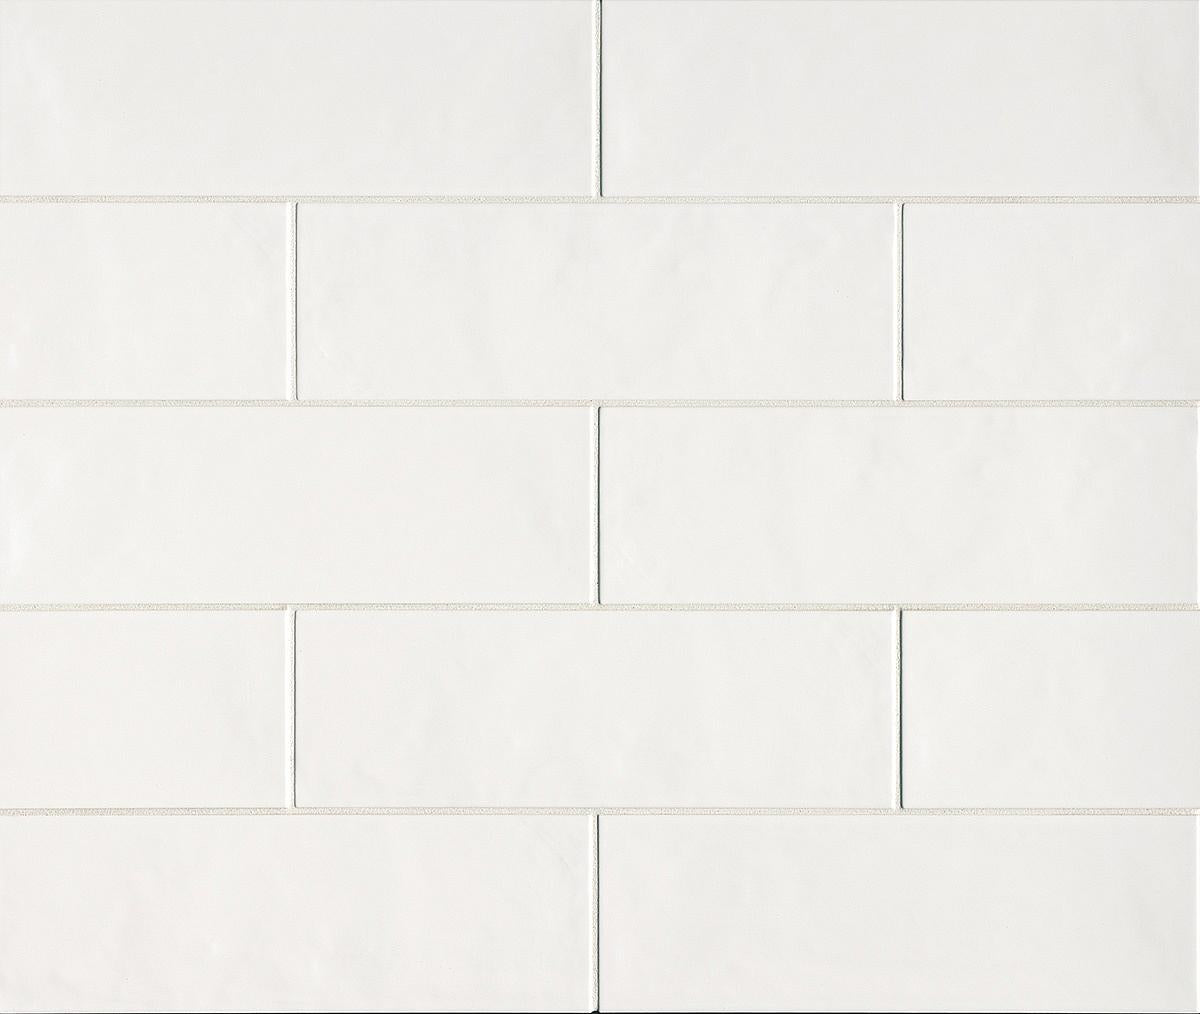 Tongue in Chic 5" x 16" Matte Wall Tile